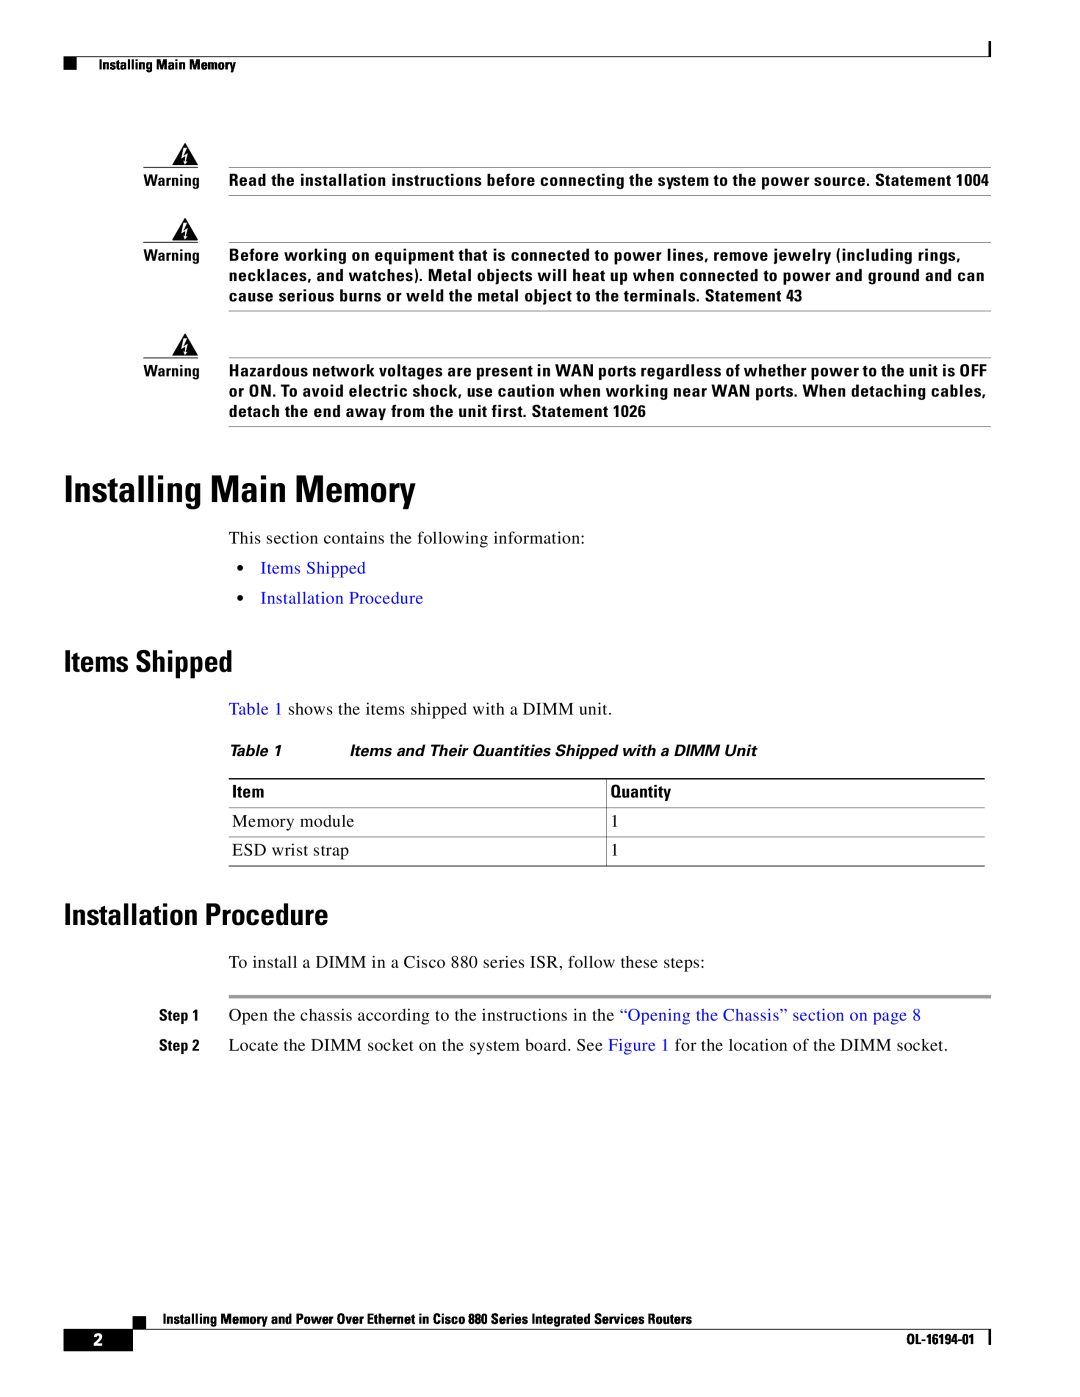 Cisco Systems 880 Series manual Installing Main Memory, Items Shipped, Installation Procedure 